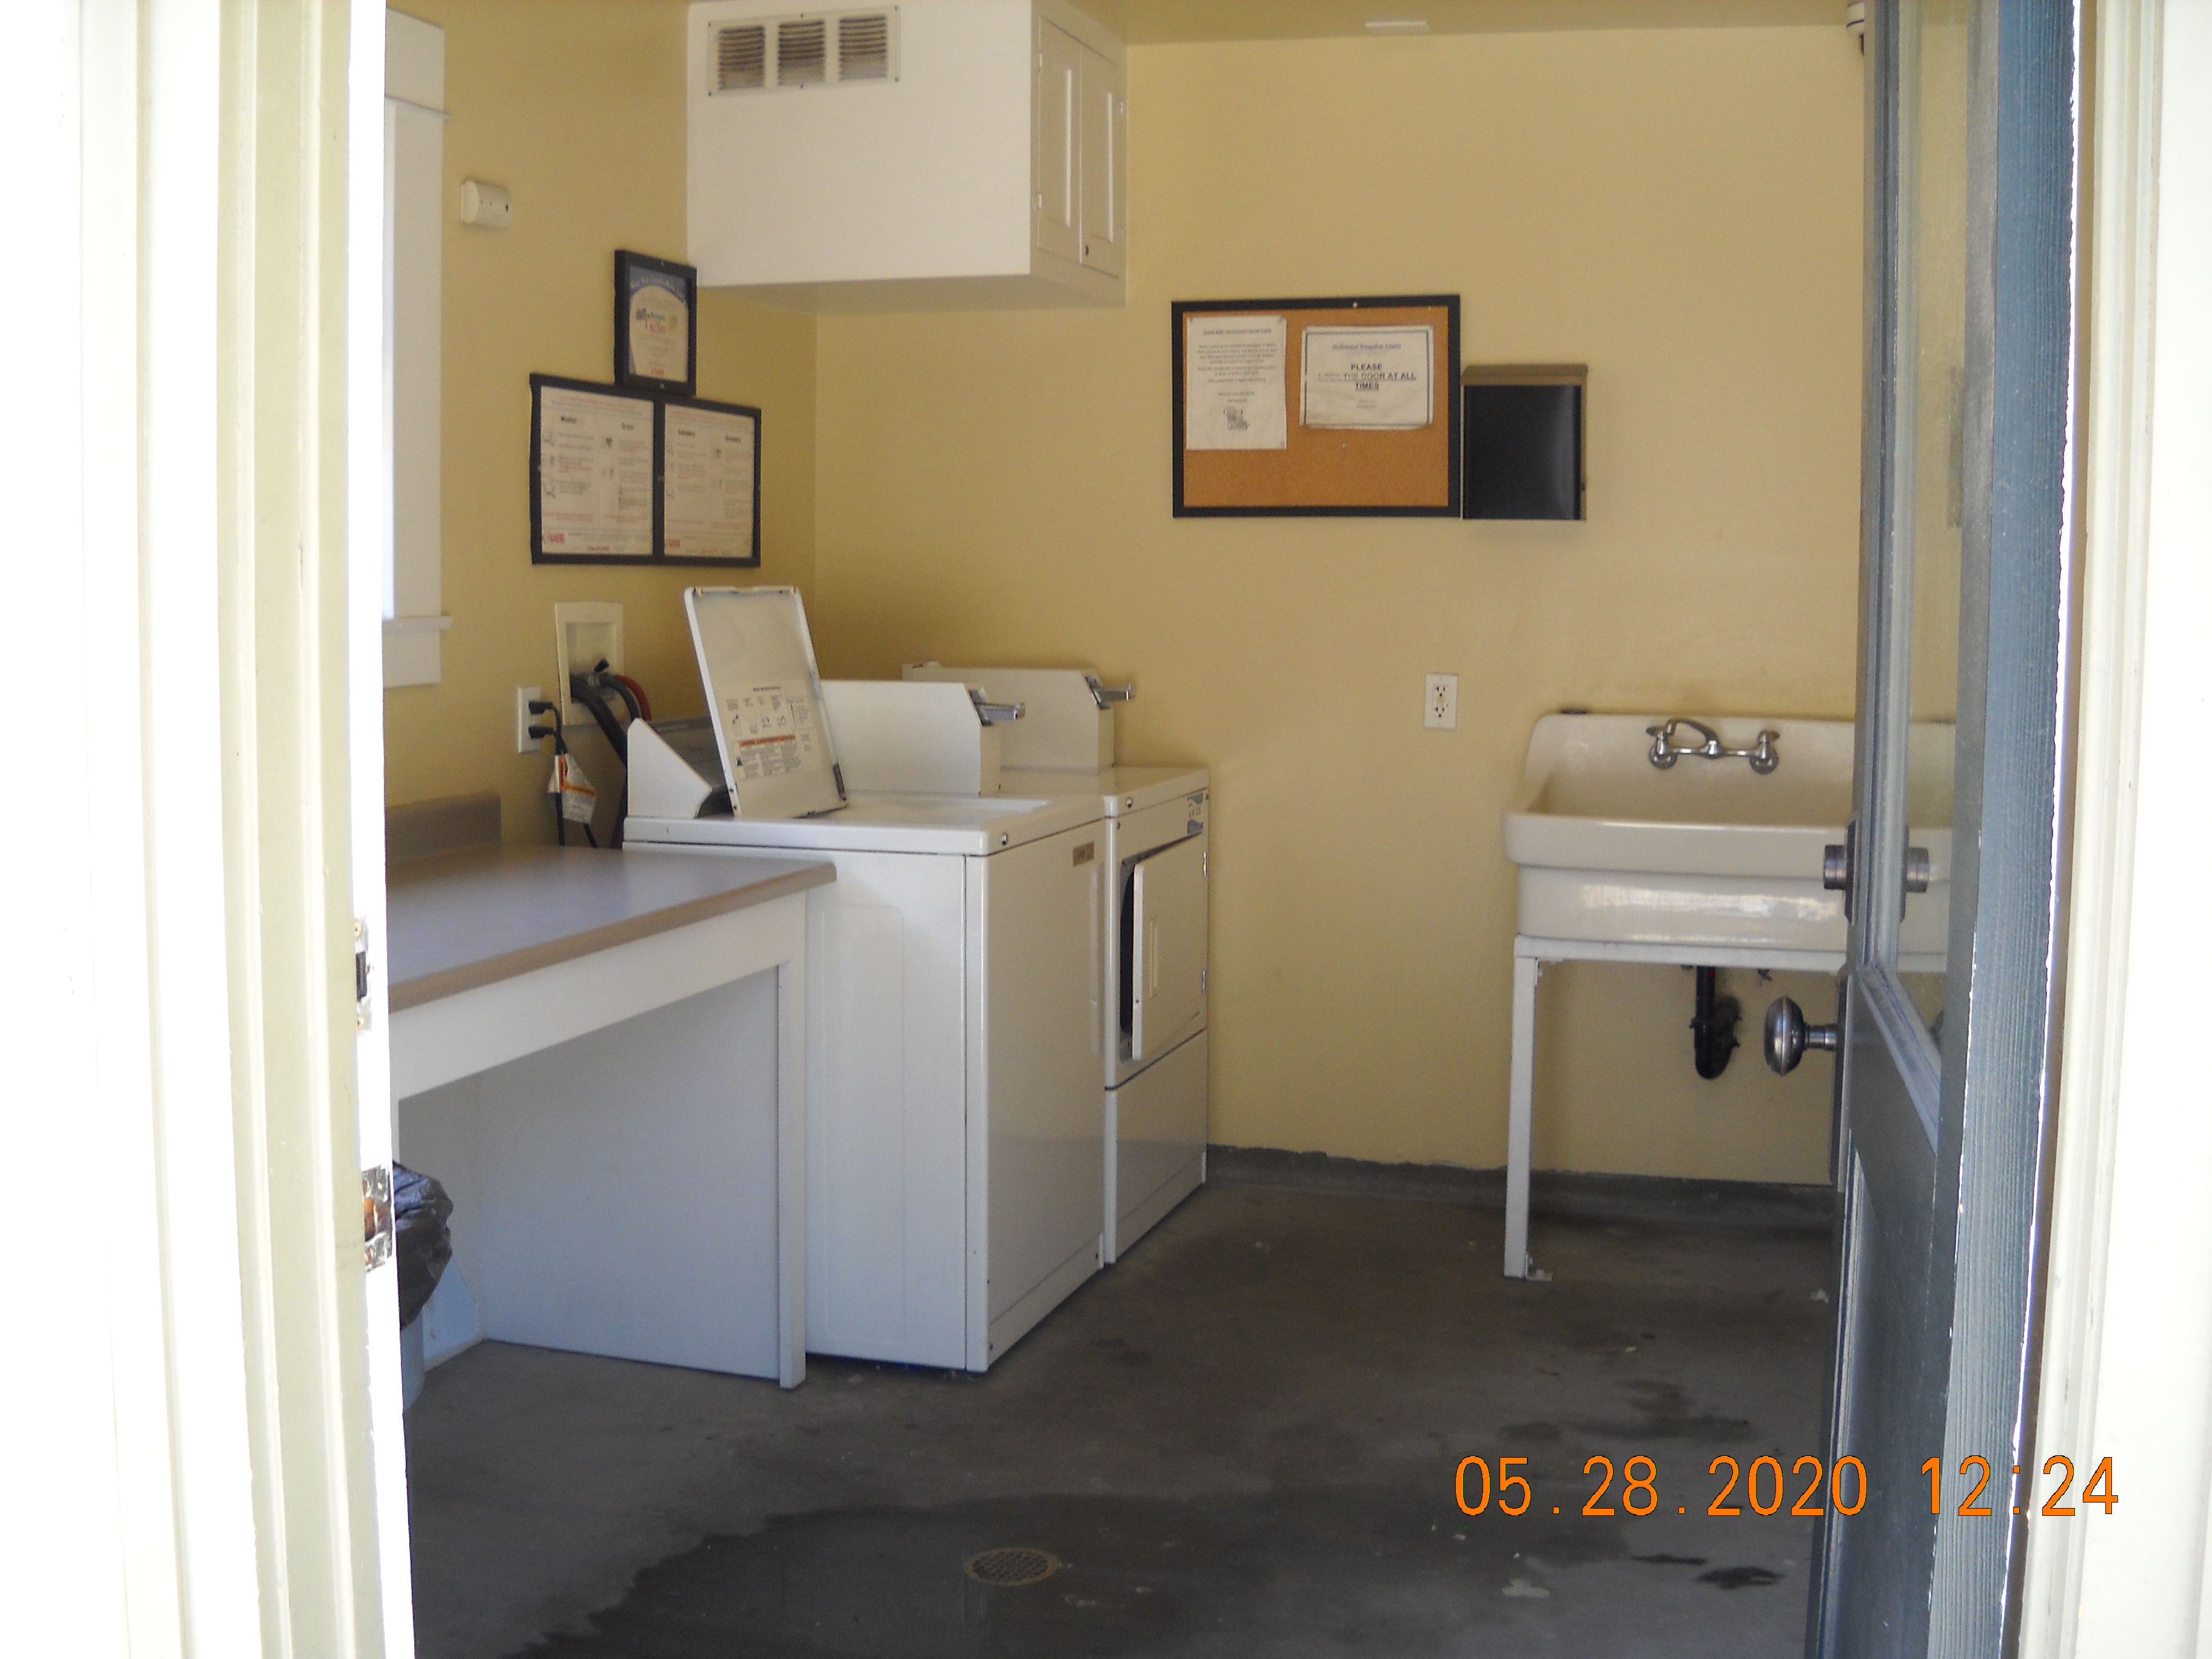 Laundry room with a washer and dryer, a sink, and a folding table. On the walls there are signs.